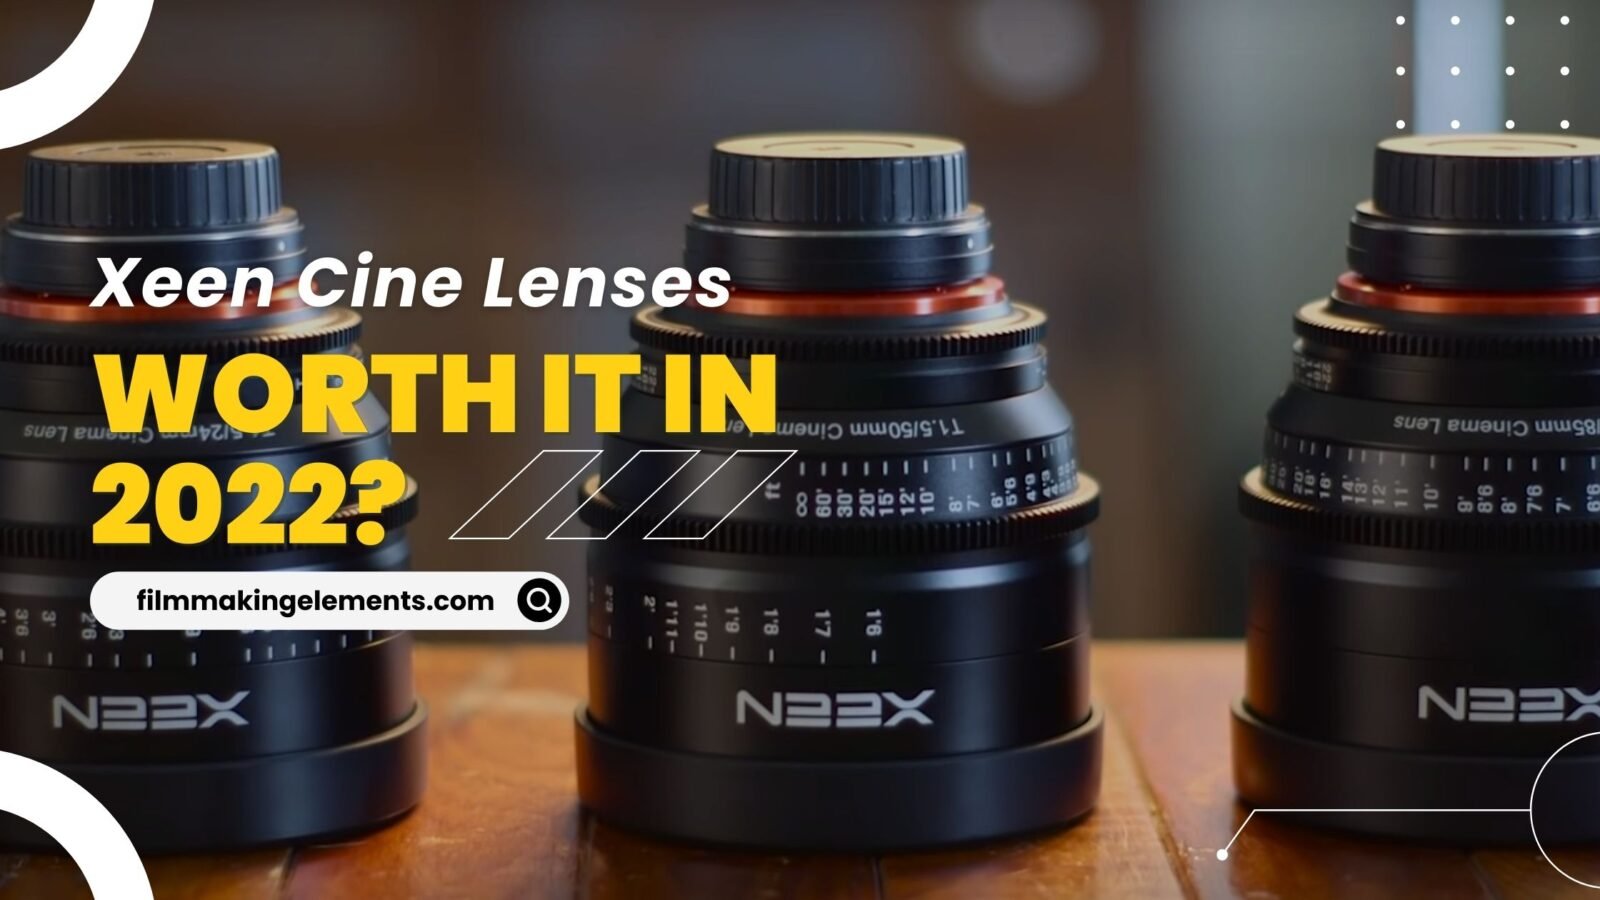 How Good Are Xeen Cine Lenses, worth it in 2022?